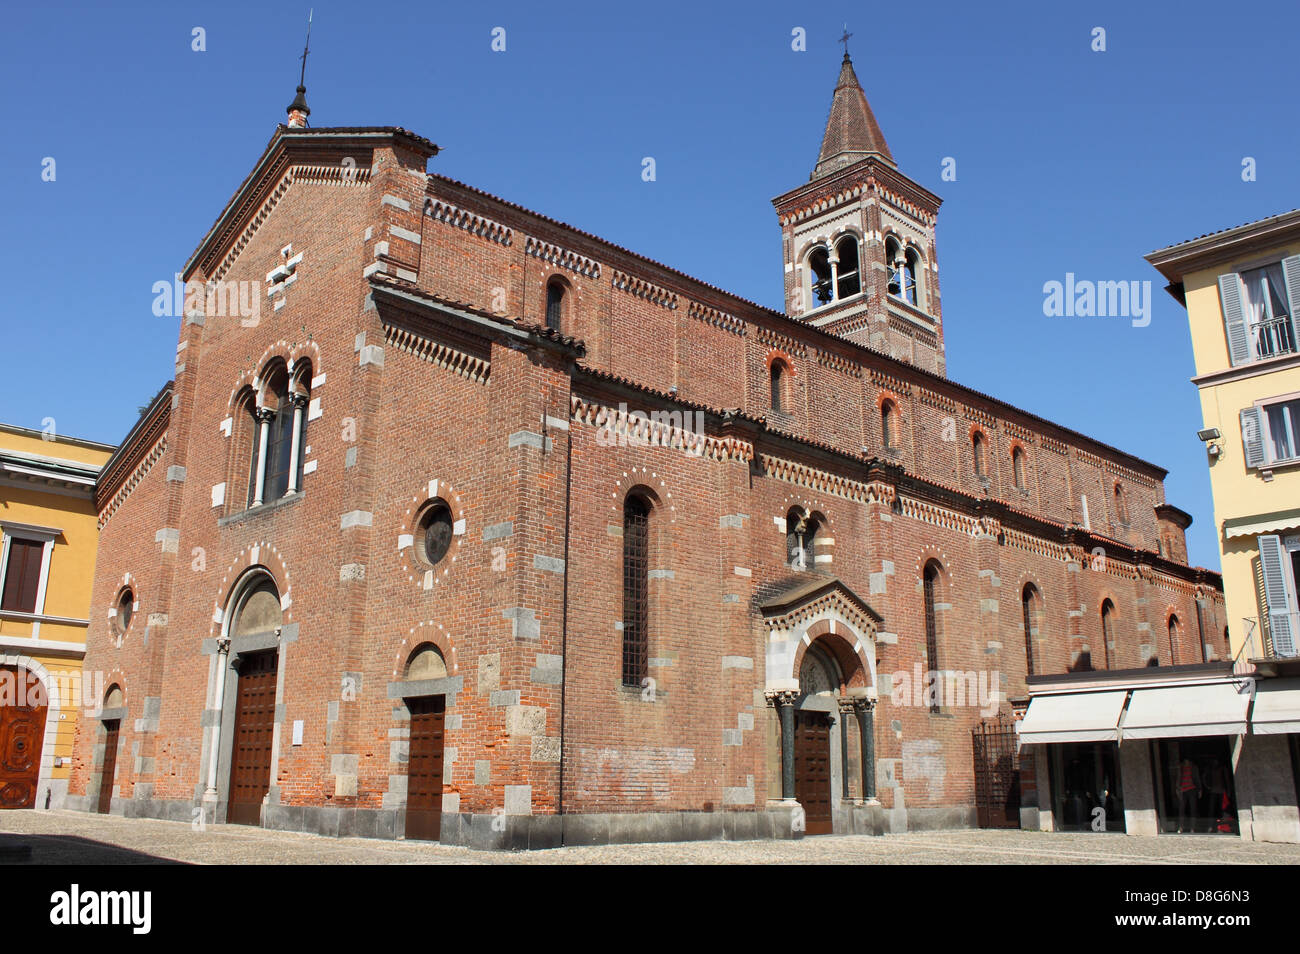 St. Peter Martyr church in Monza, Italy Stock Photo